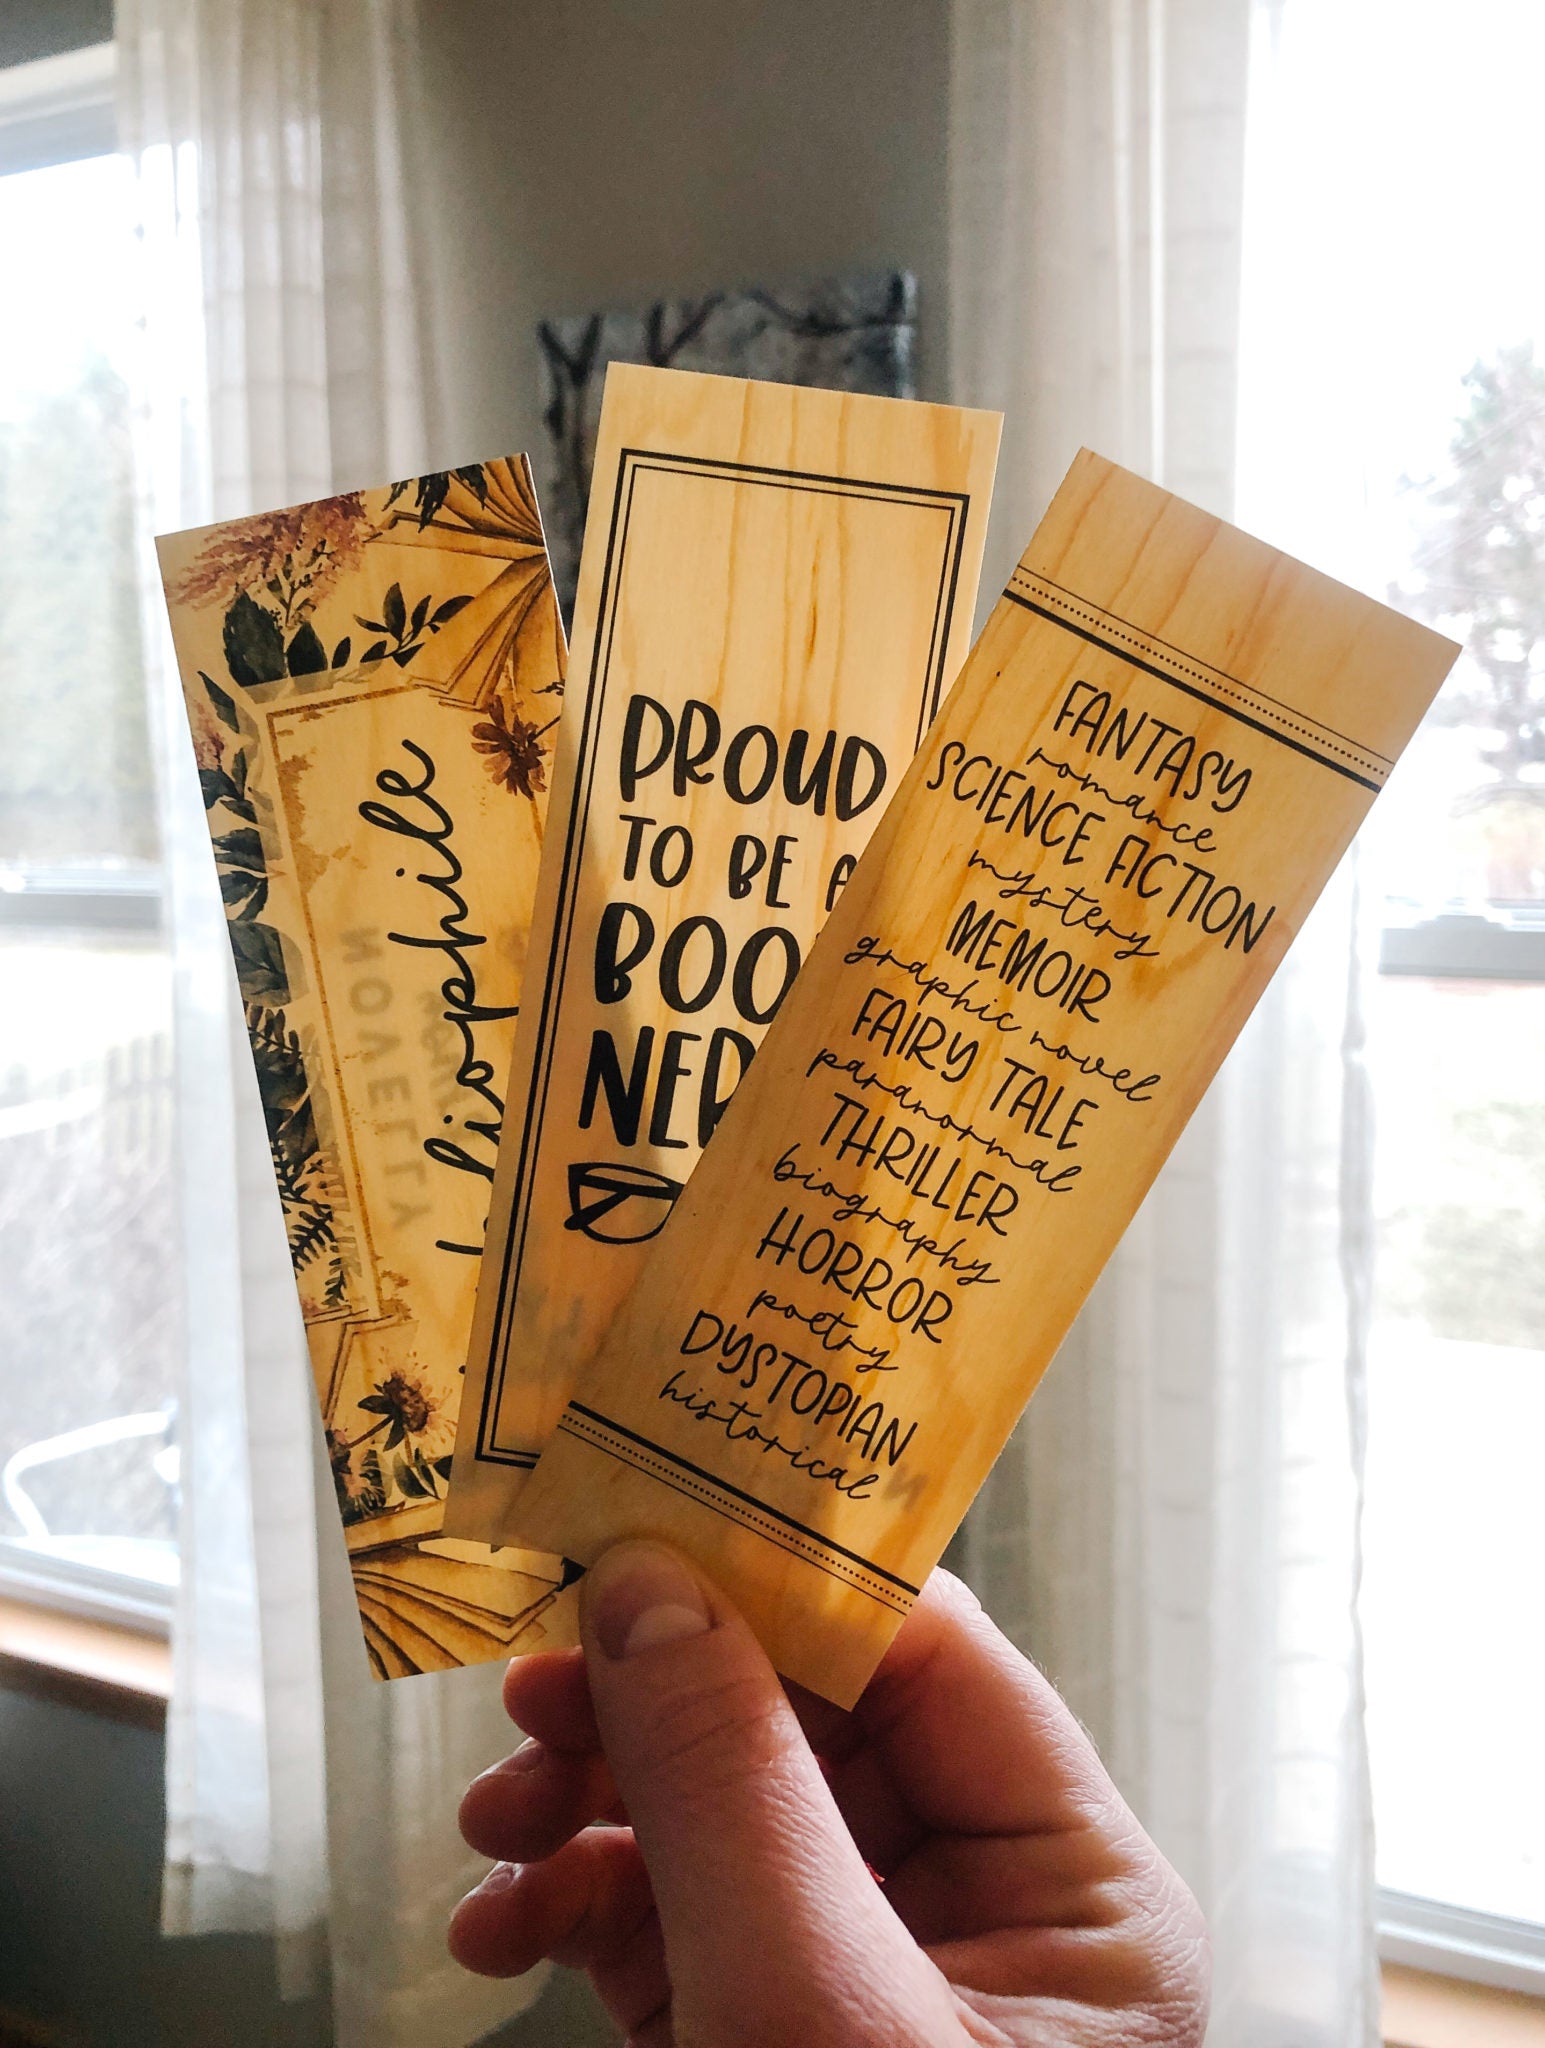 bookmarks made of wood (woodmarks) for readers, book nerds, bibliophiles